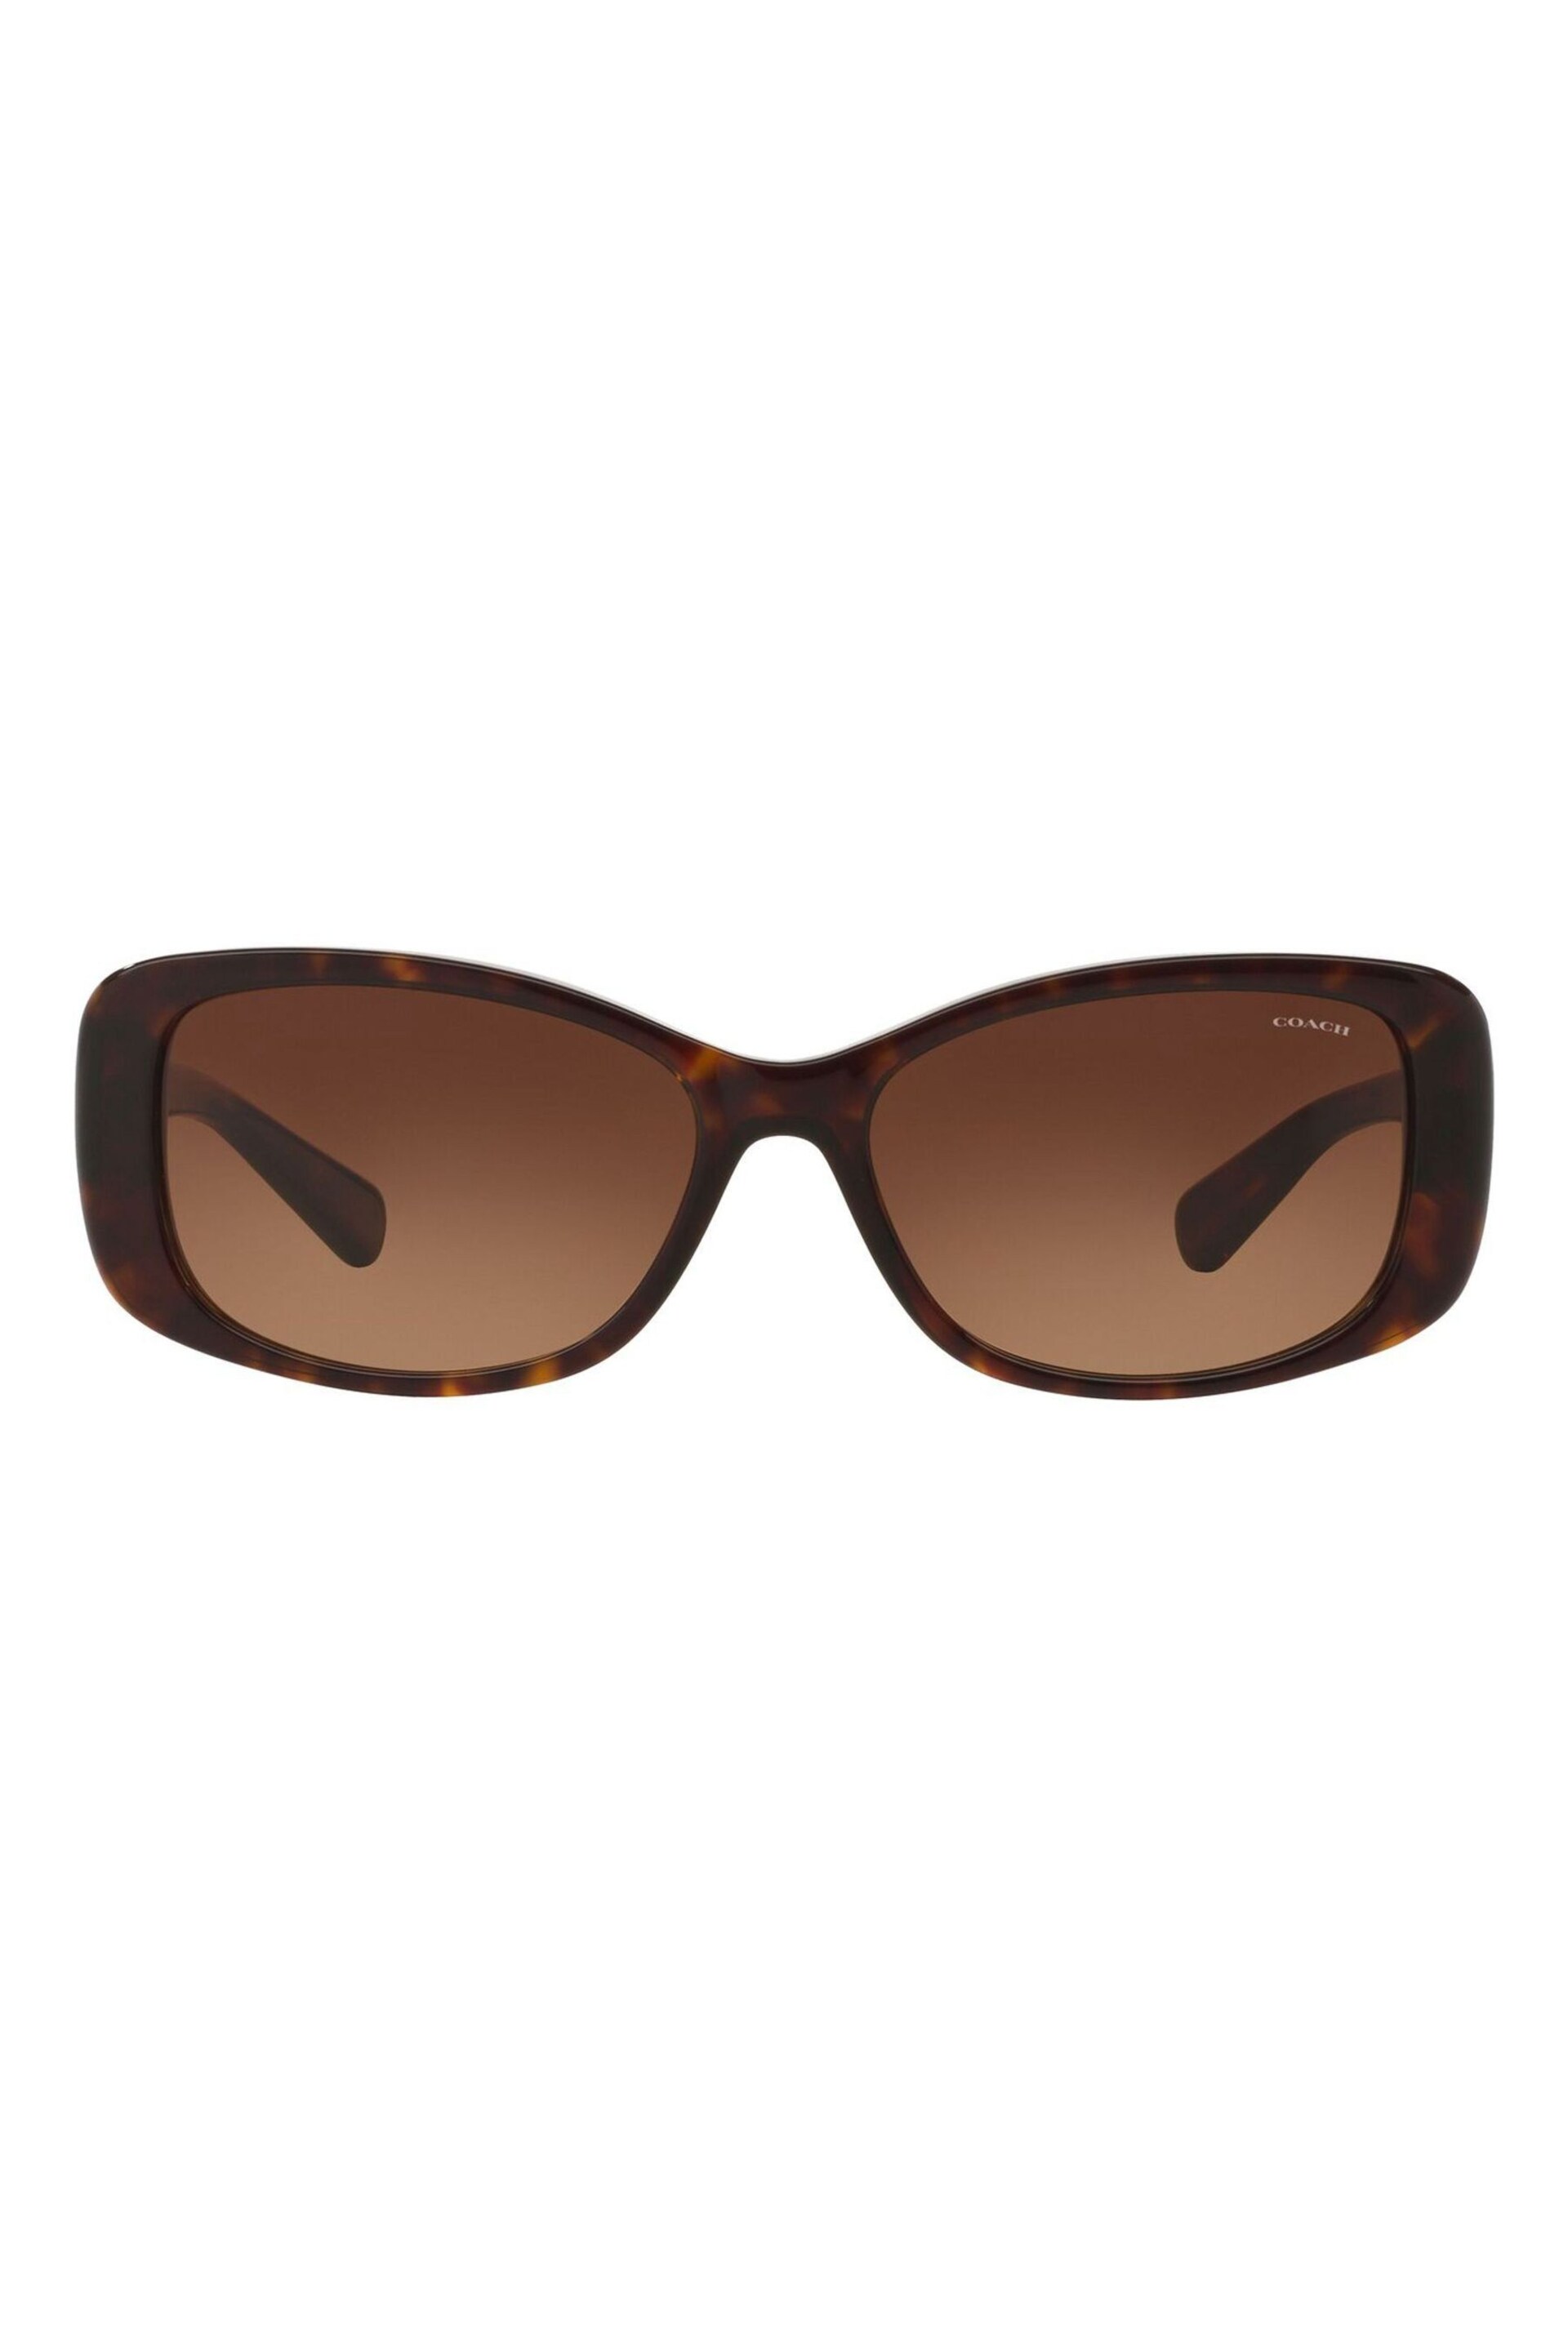 Coach Brown L156 Oval Sunglasses - Image 3 of 13